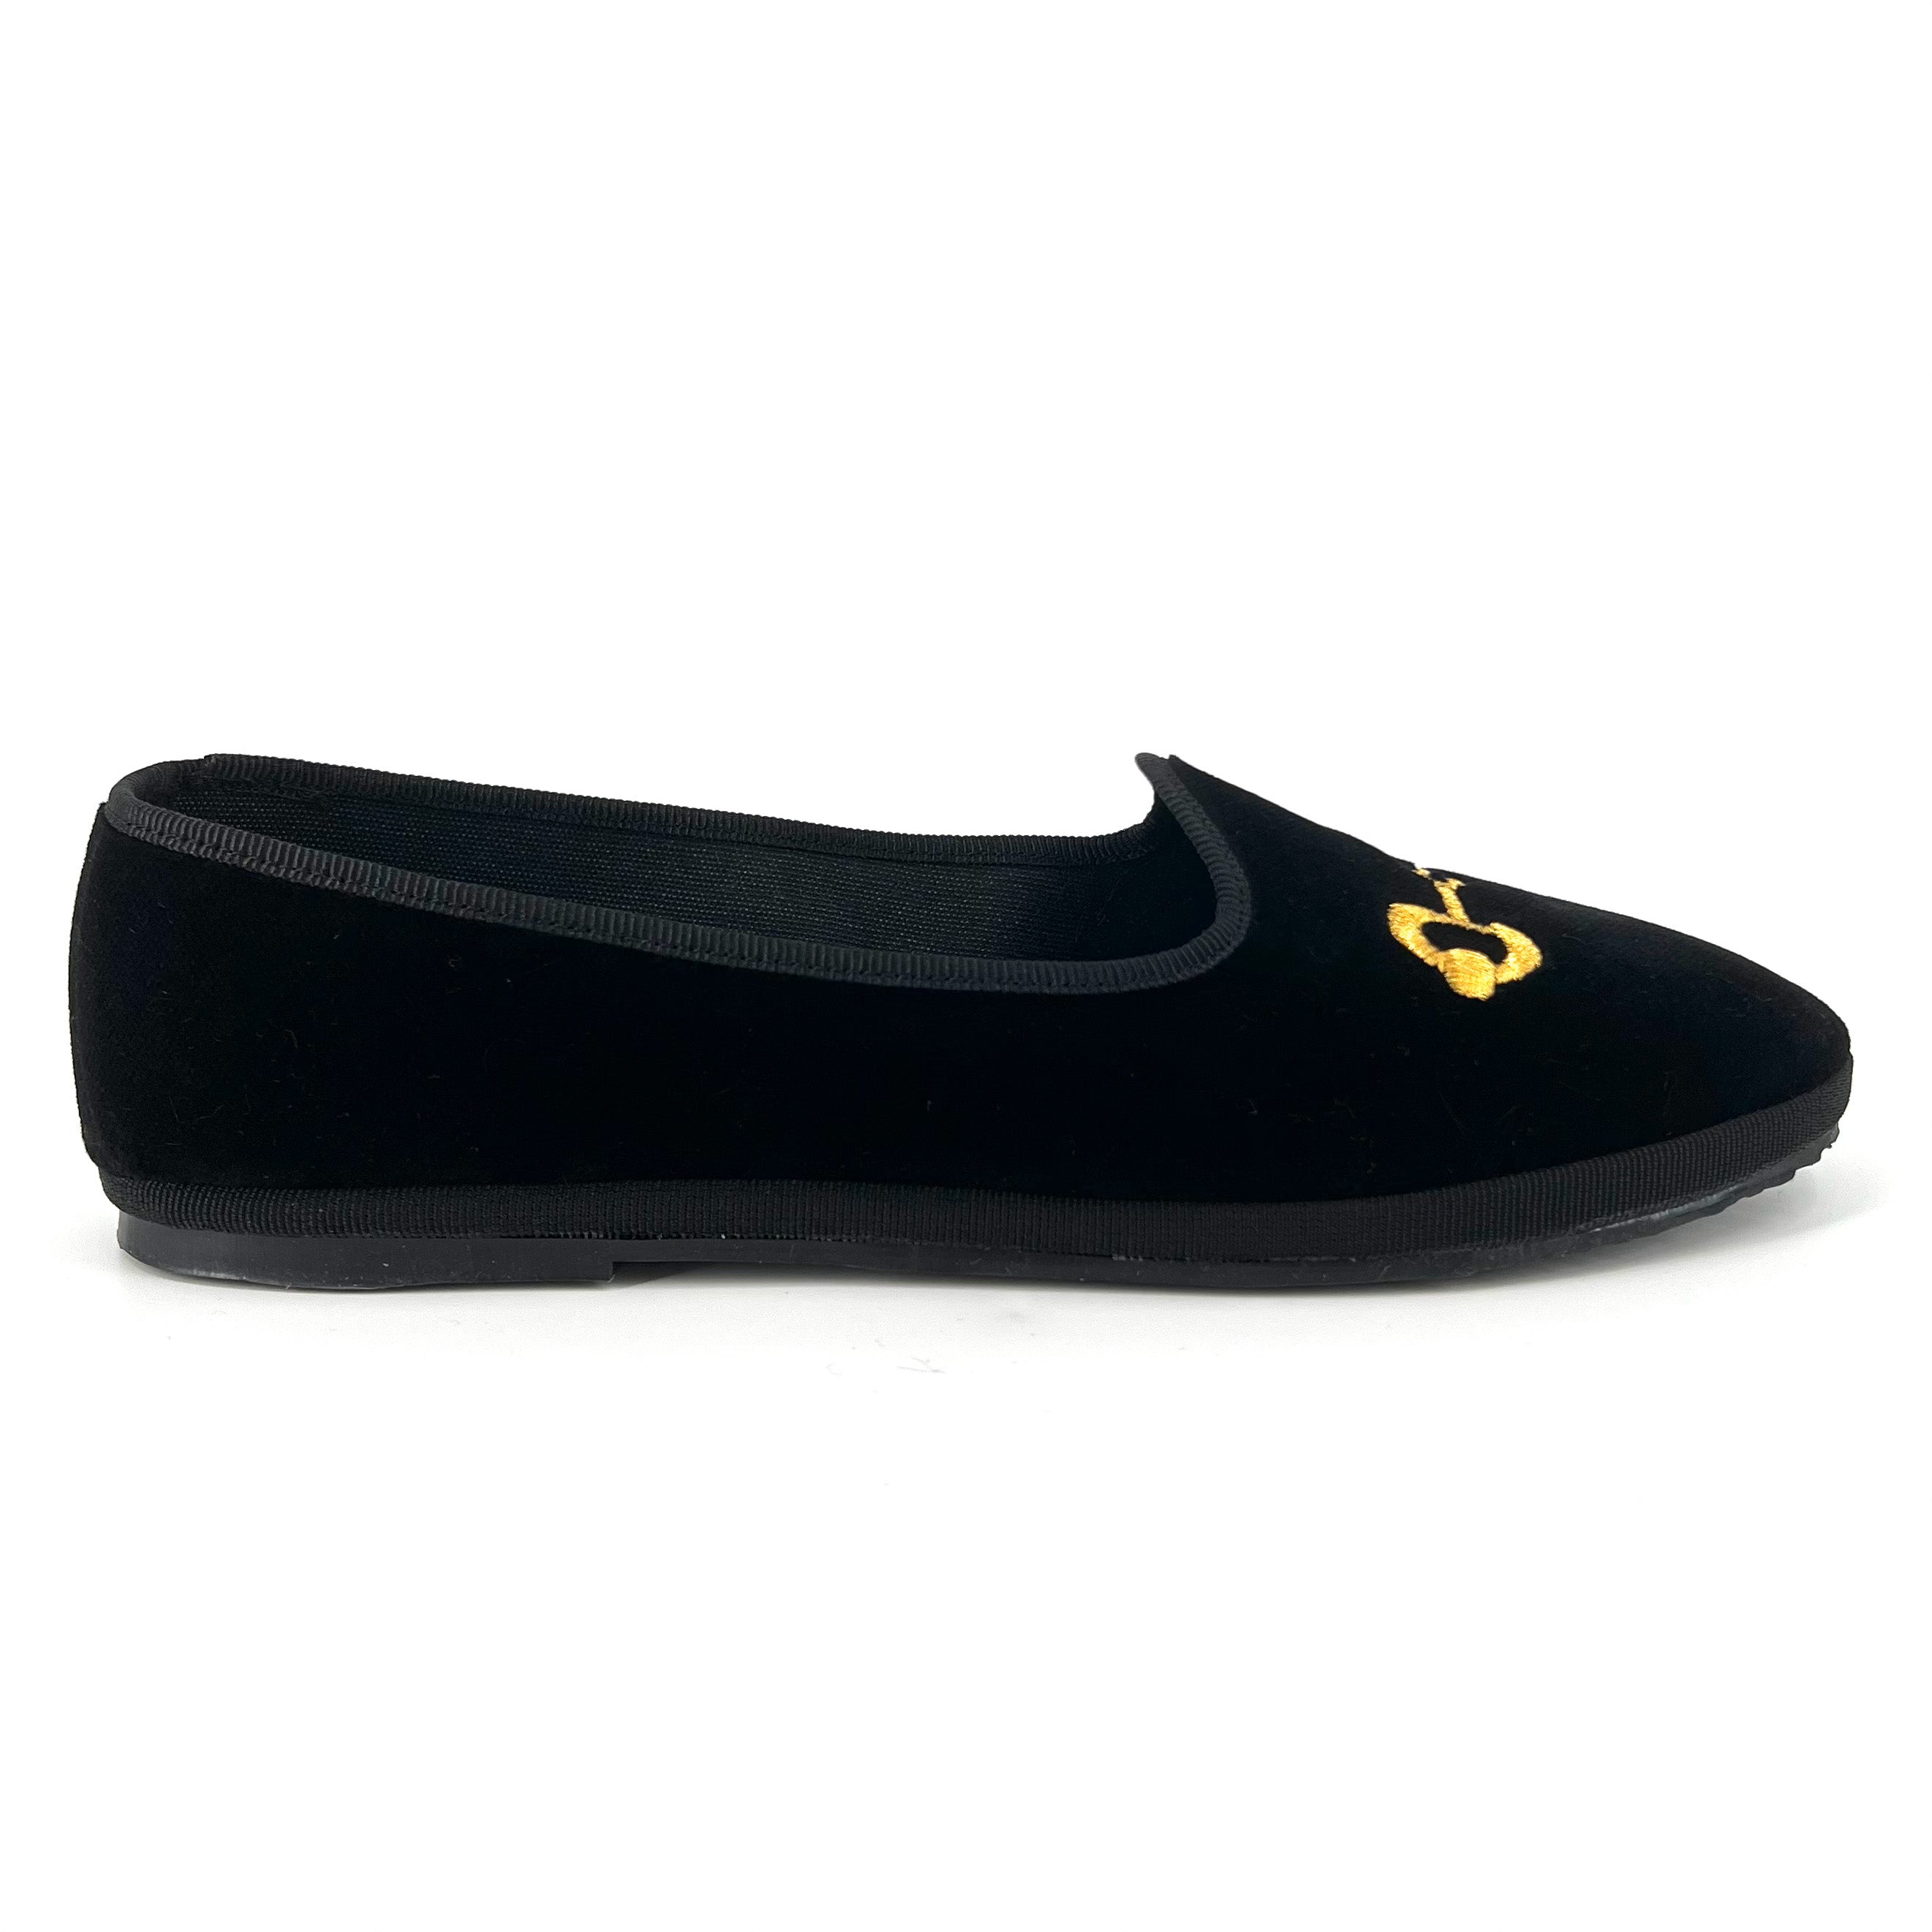 The Velvet Everyday Flat with Embroidered Bit in Black